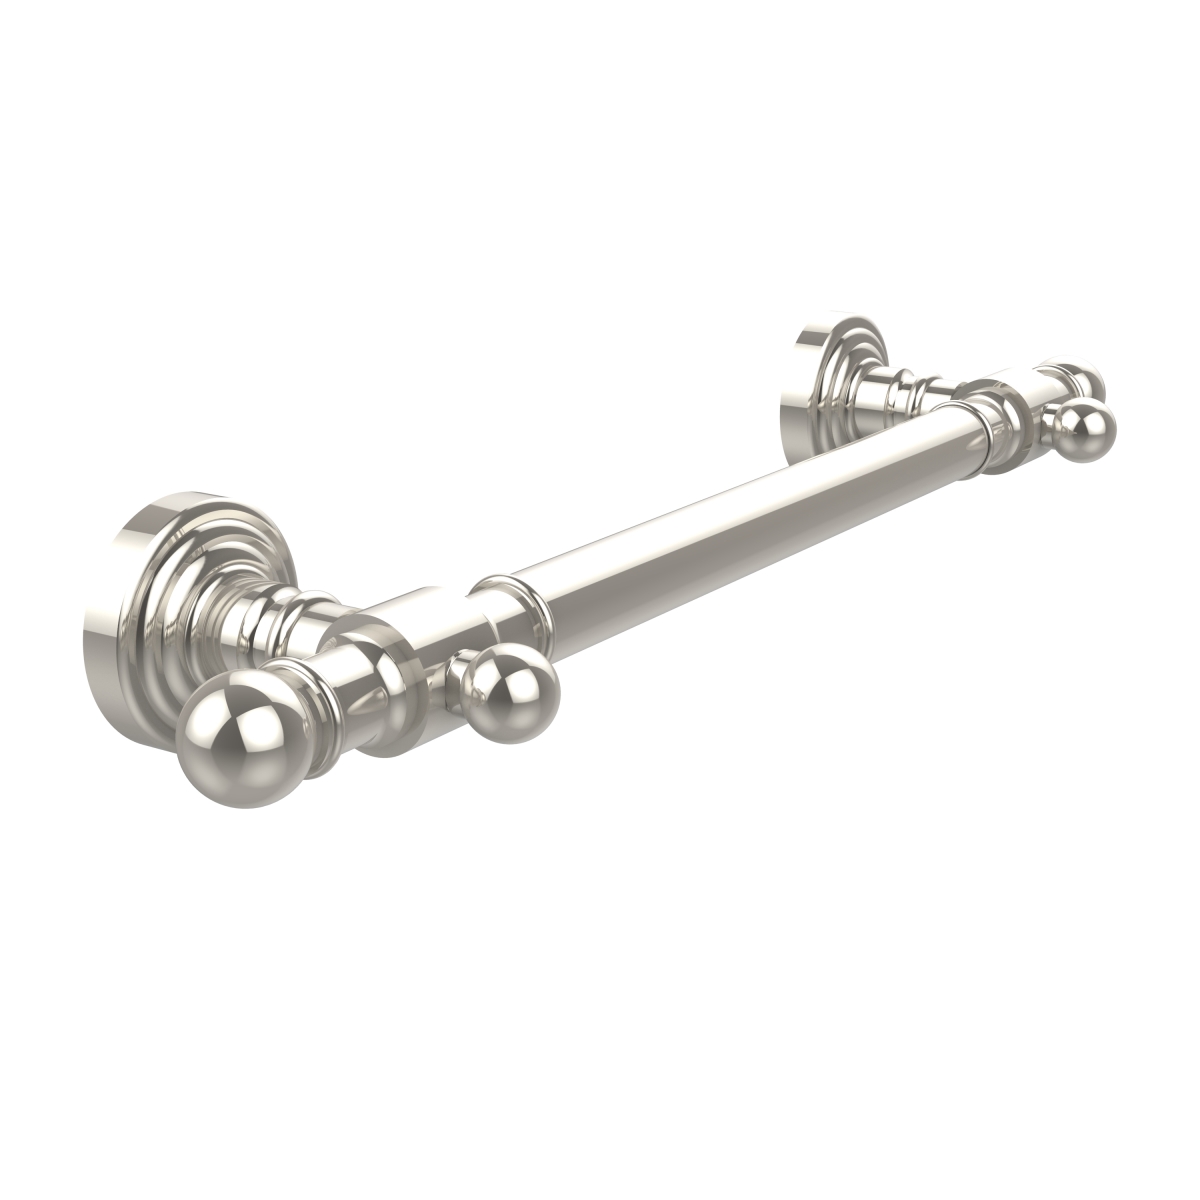 Picture of Allied Brass WP-GRS-16-PNI 16 in. Grab Bar Smooth, Polished Nickel - 3.5 x 22 x 16 in.